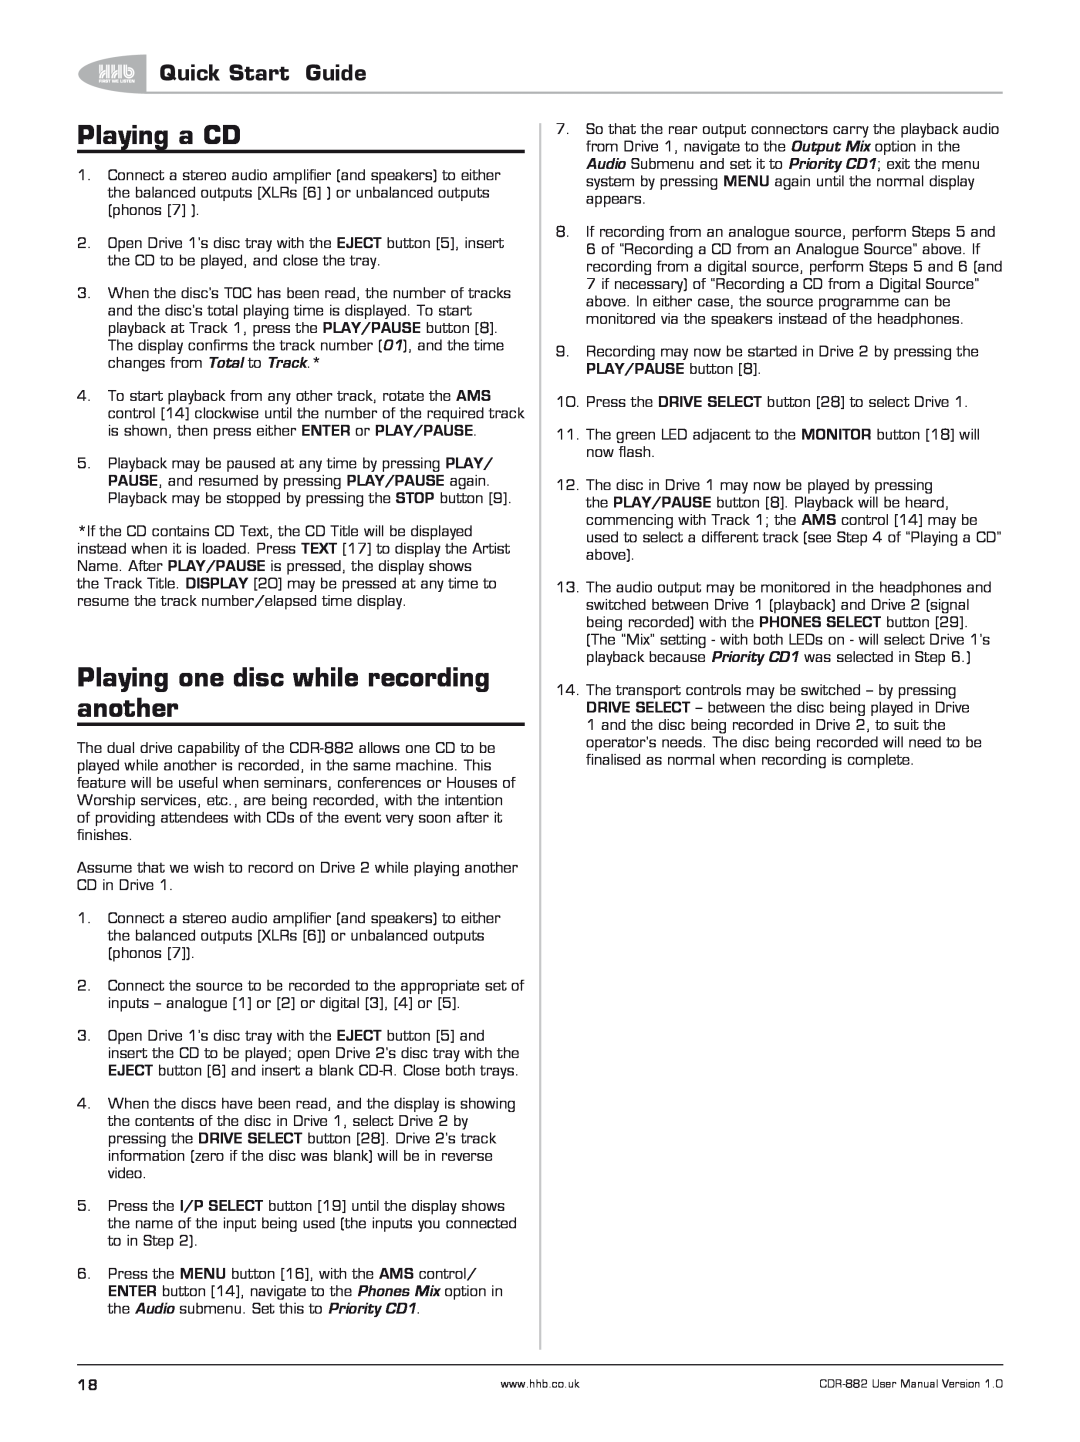 HHB comm CDR-882 user manual Playing a CD, Playing one disc while recording, another, Quick Start Guide, PLAY/PAUSE button 